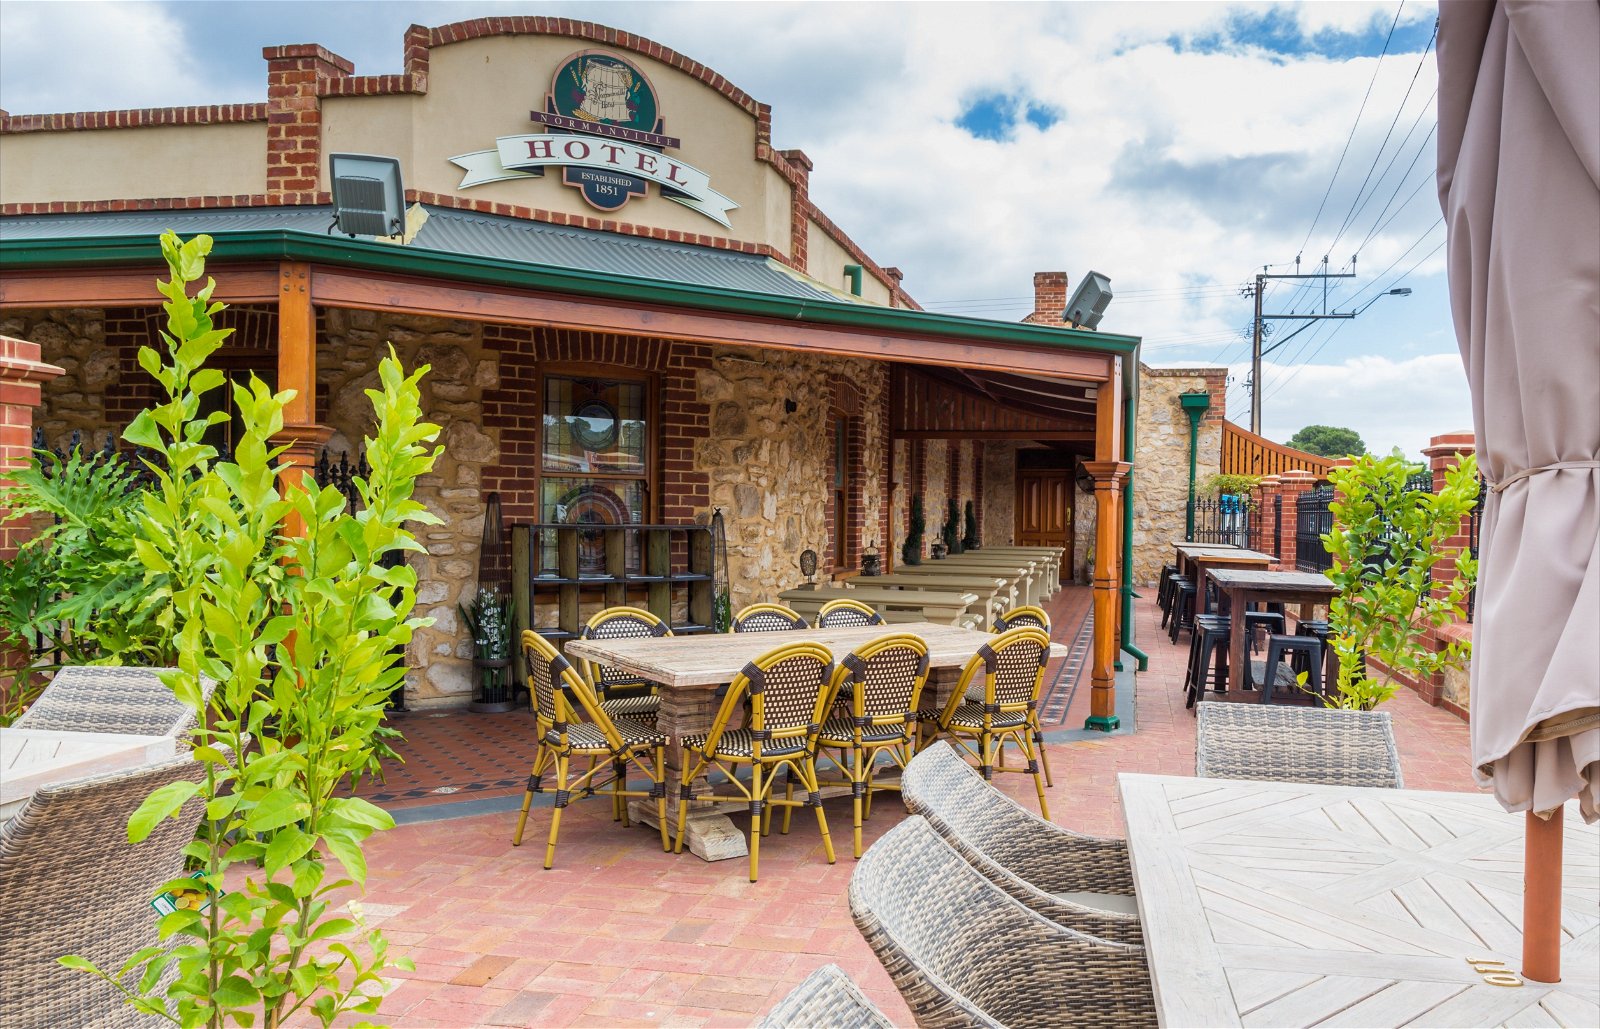 Normanville Hotel - New South Wales Tourism 